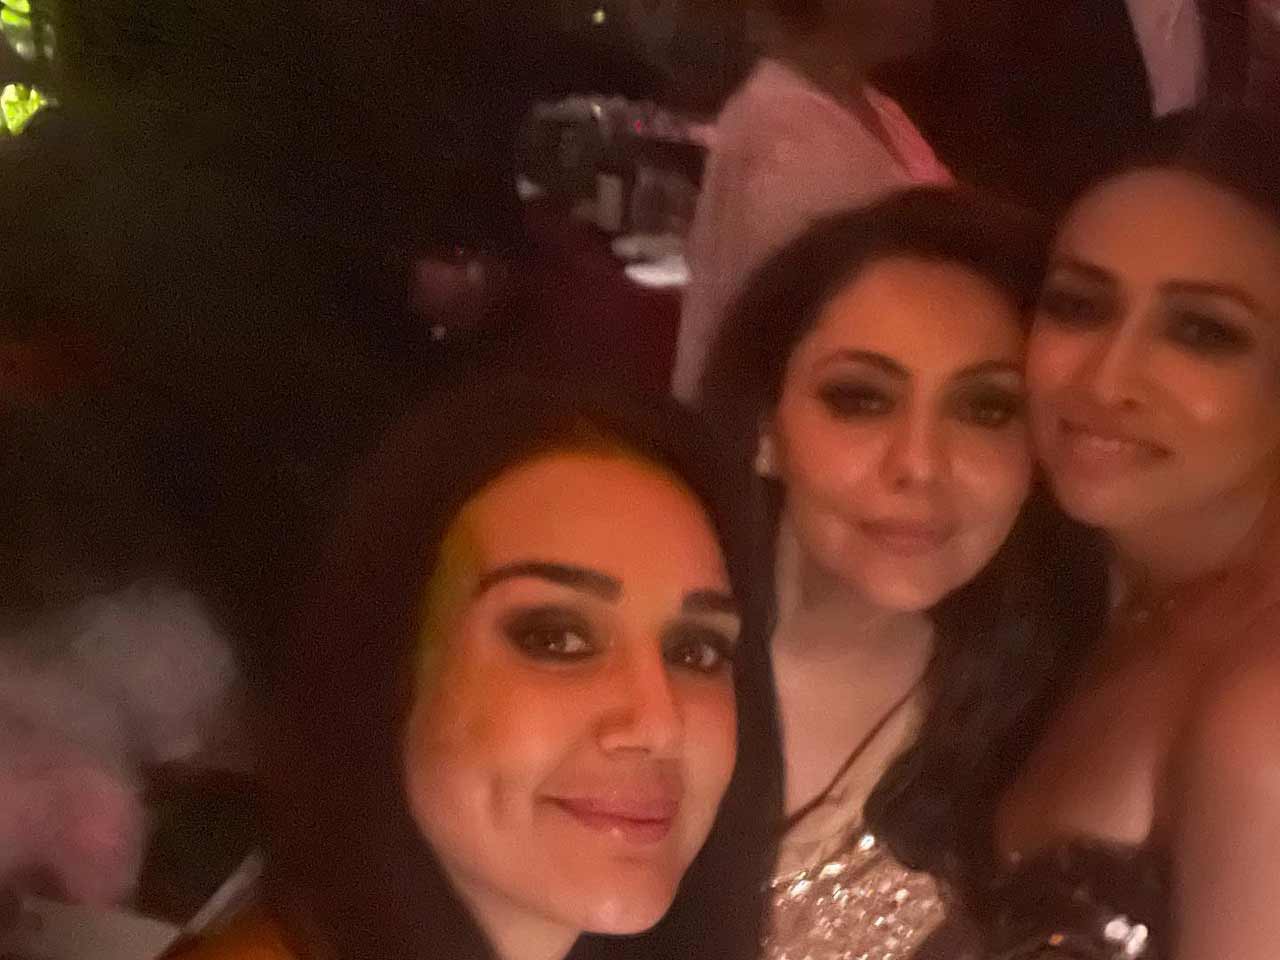 Gauri Khan also attended the party and the popular interior designer posed with her BFF Preity Zinta at the bash.